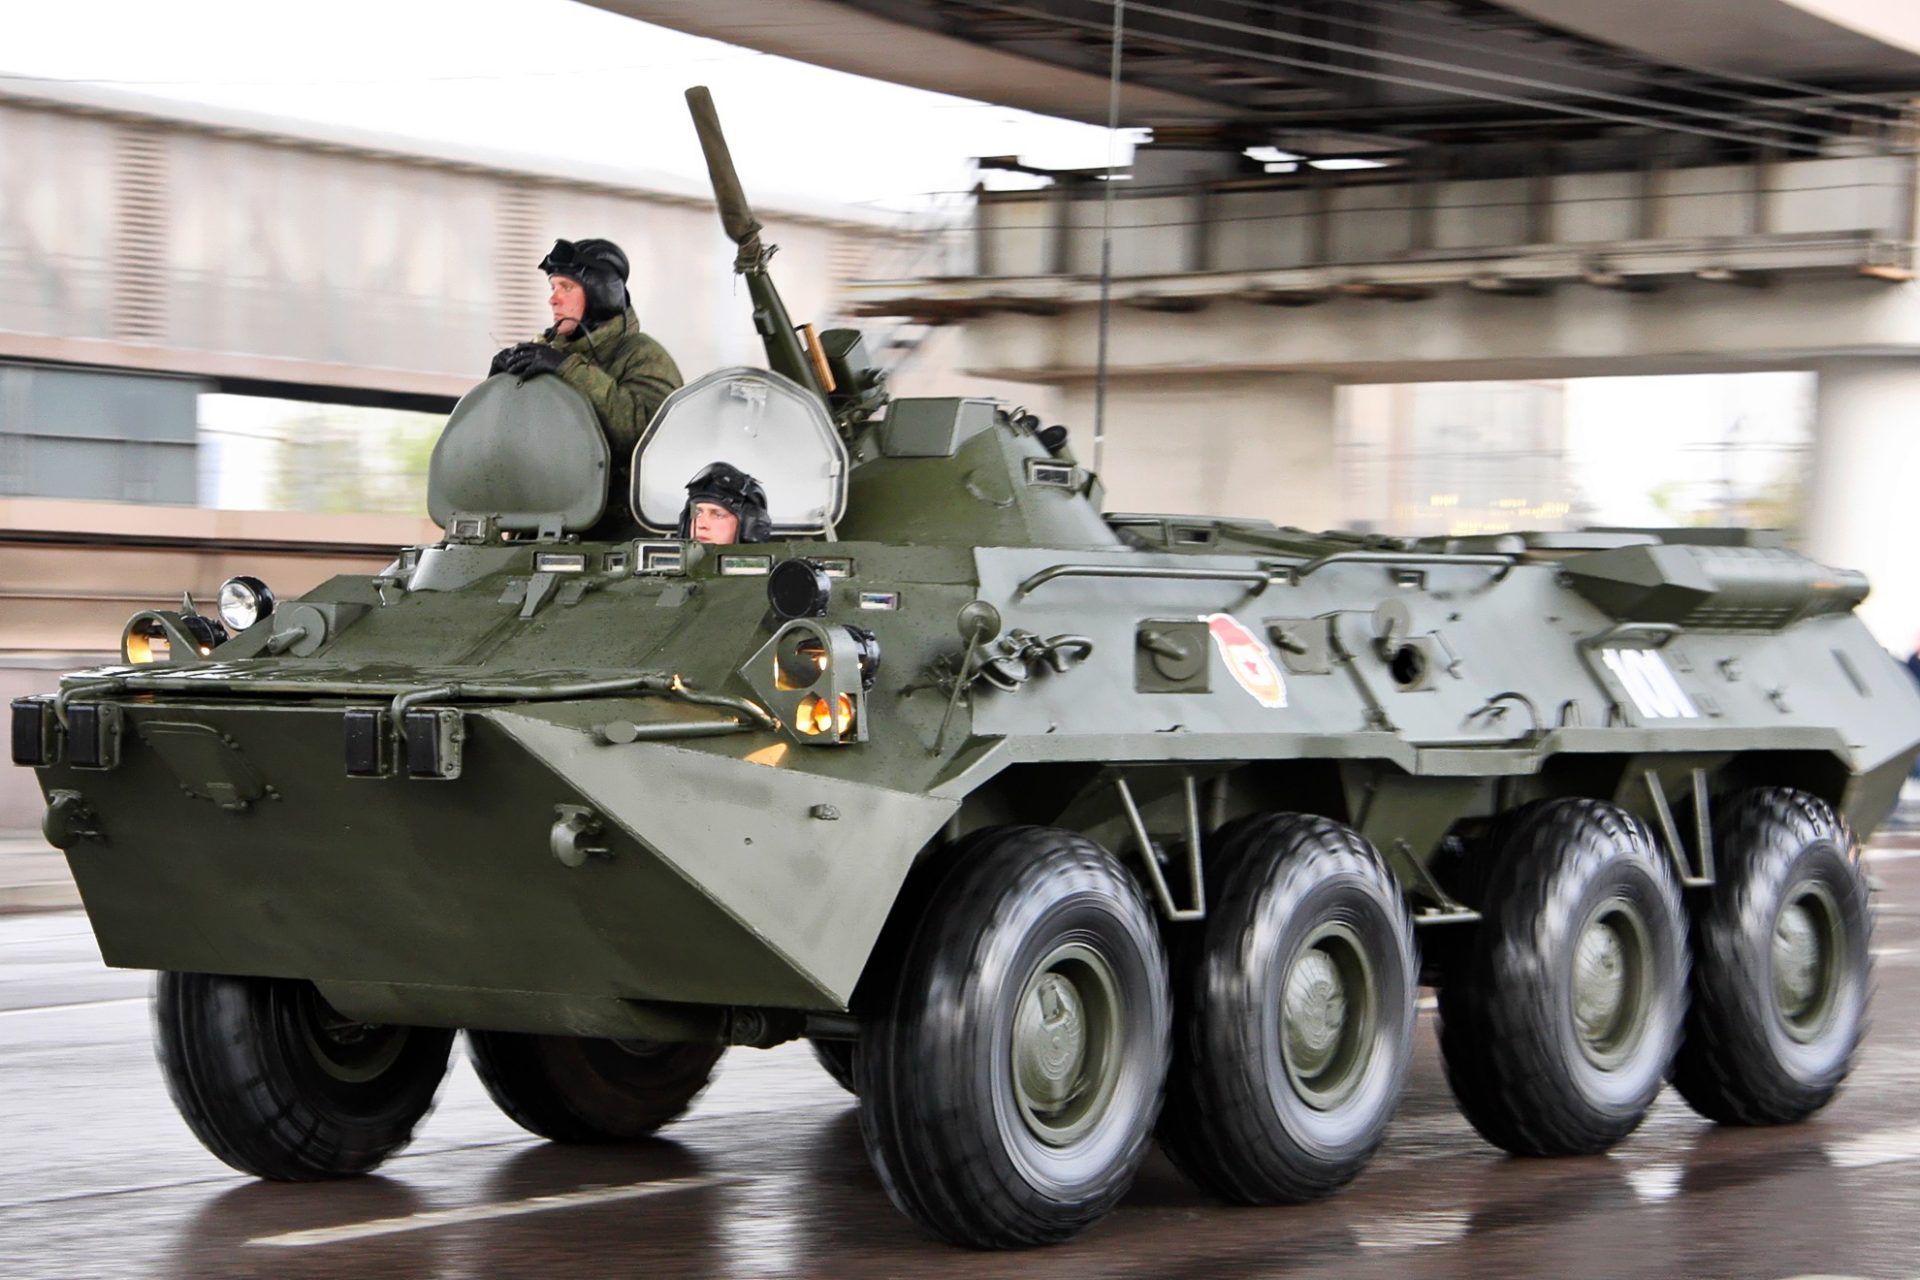 The Russian vehicle was a BTR-82A